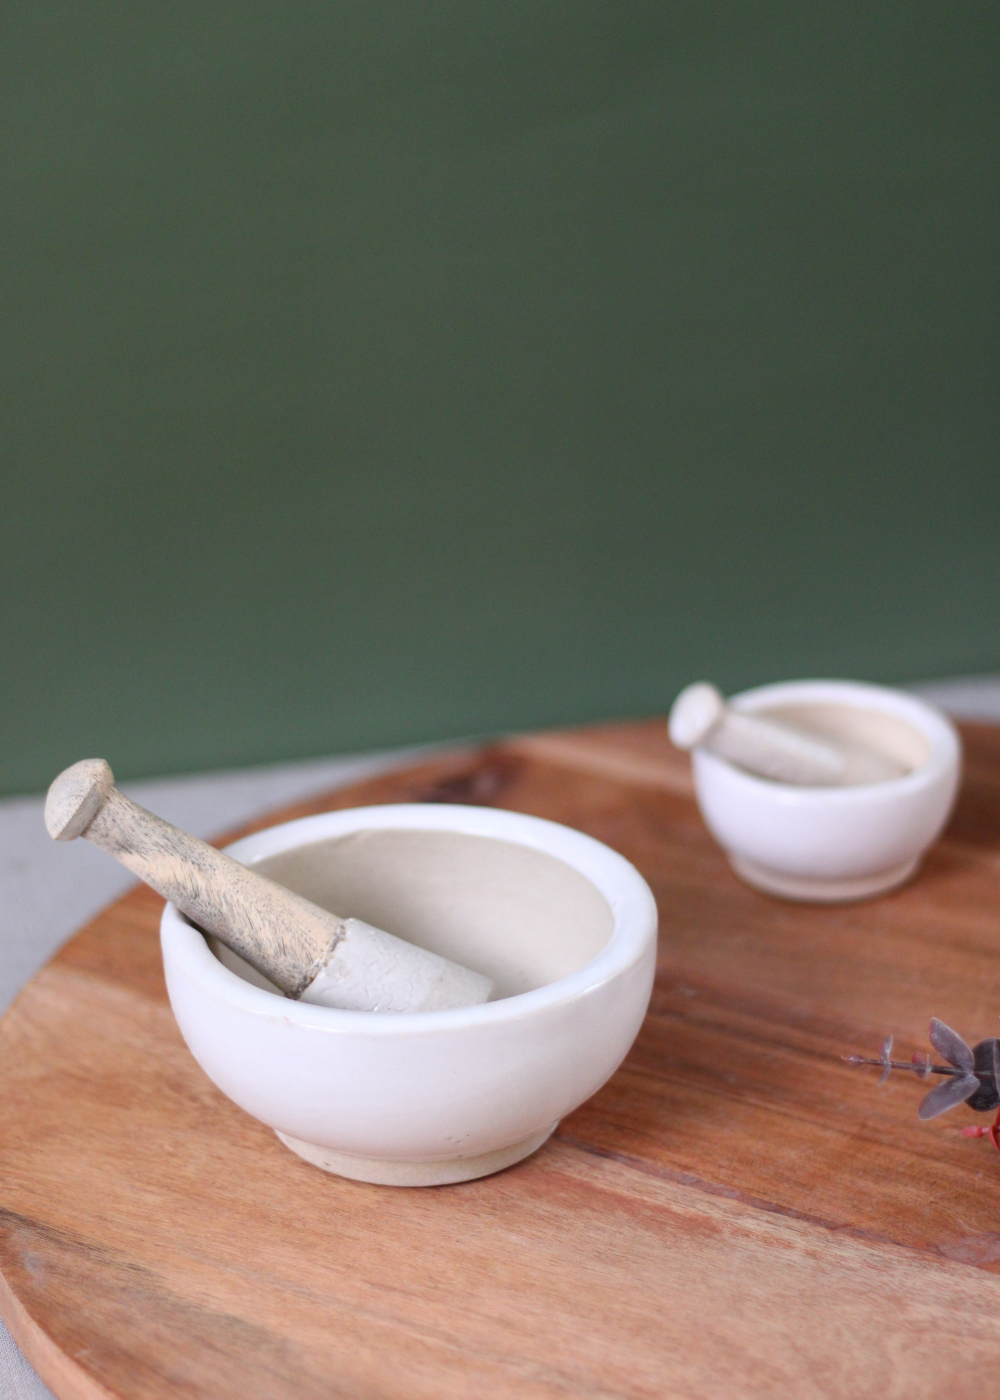 Two marble mortar & pestles on wooden surface